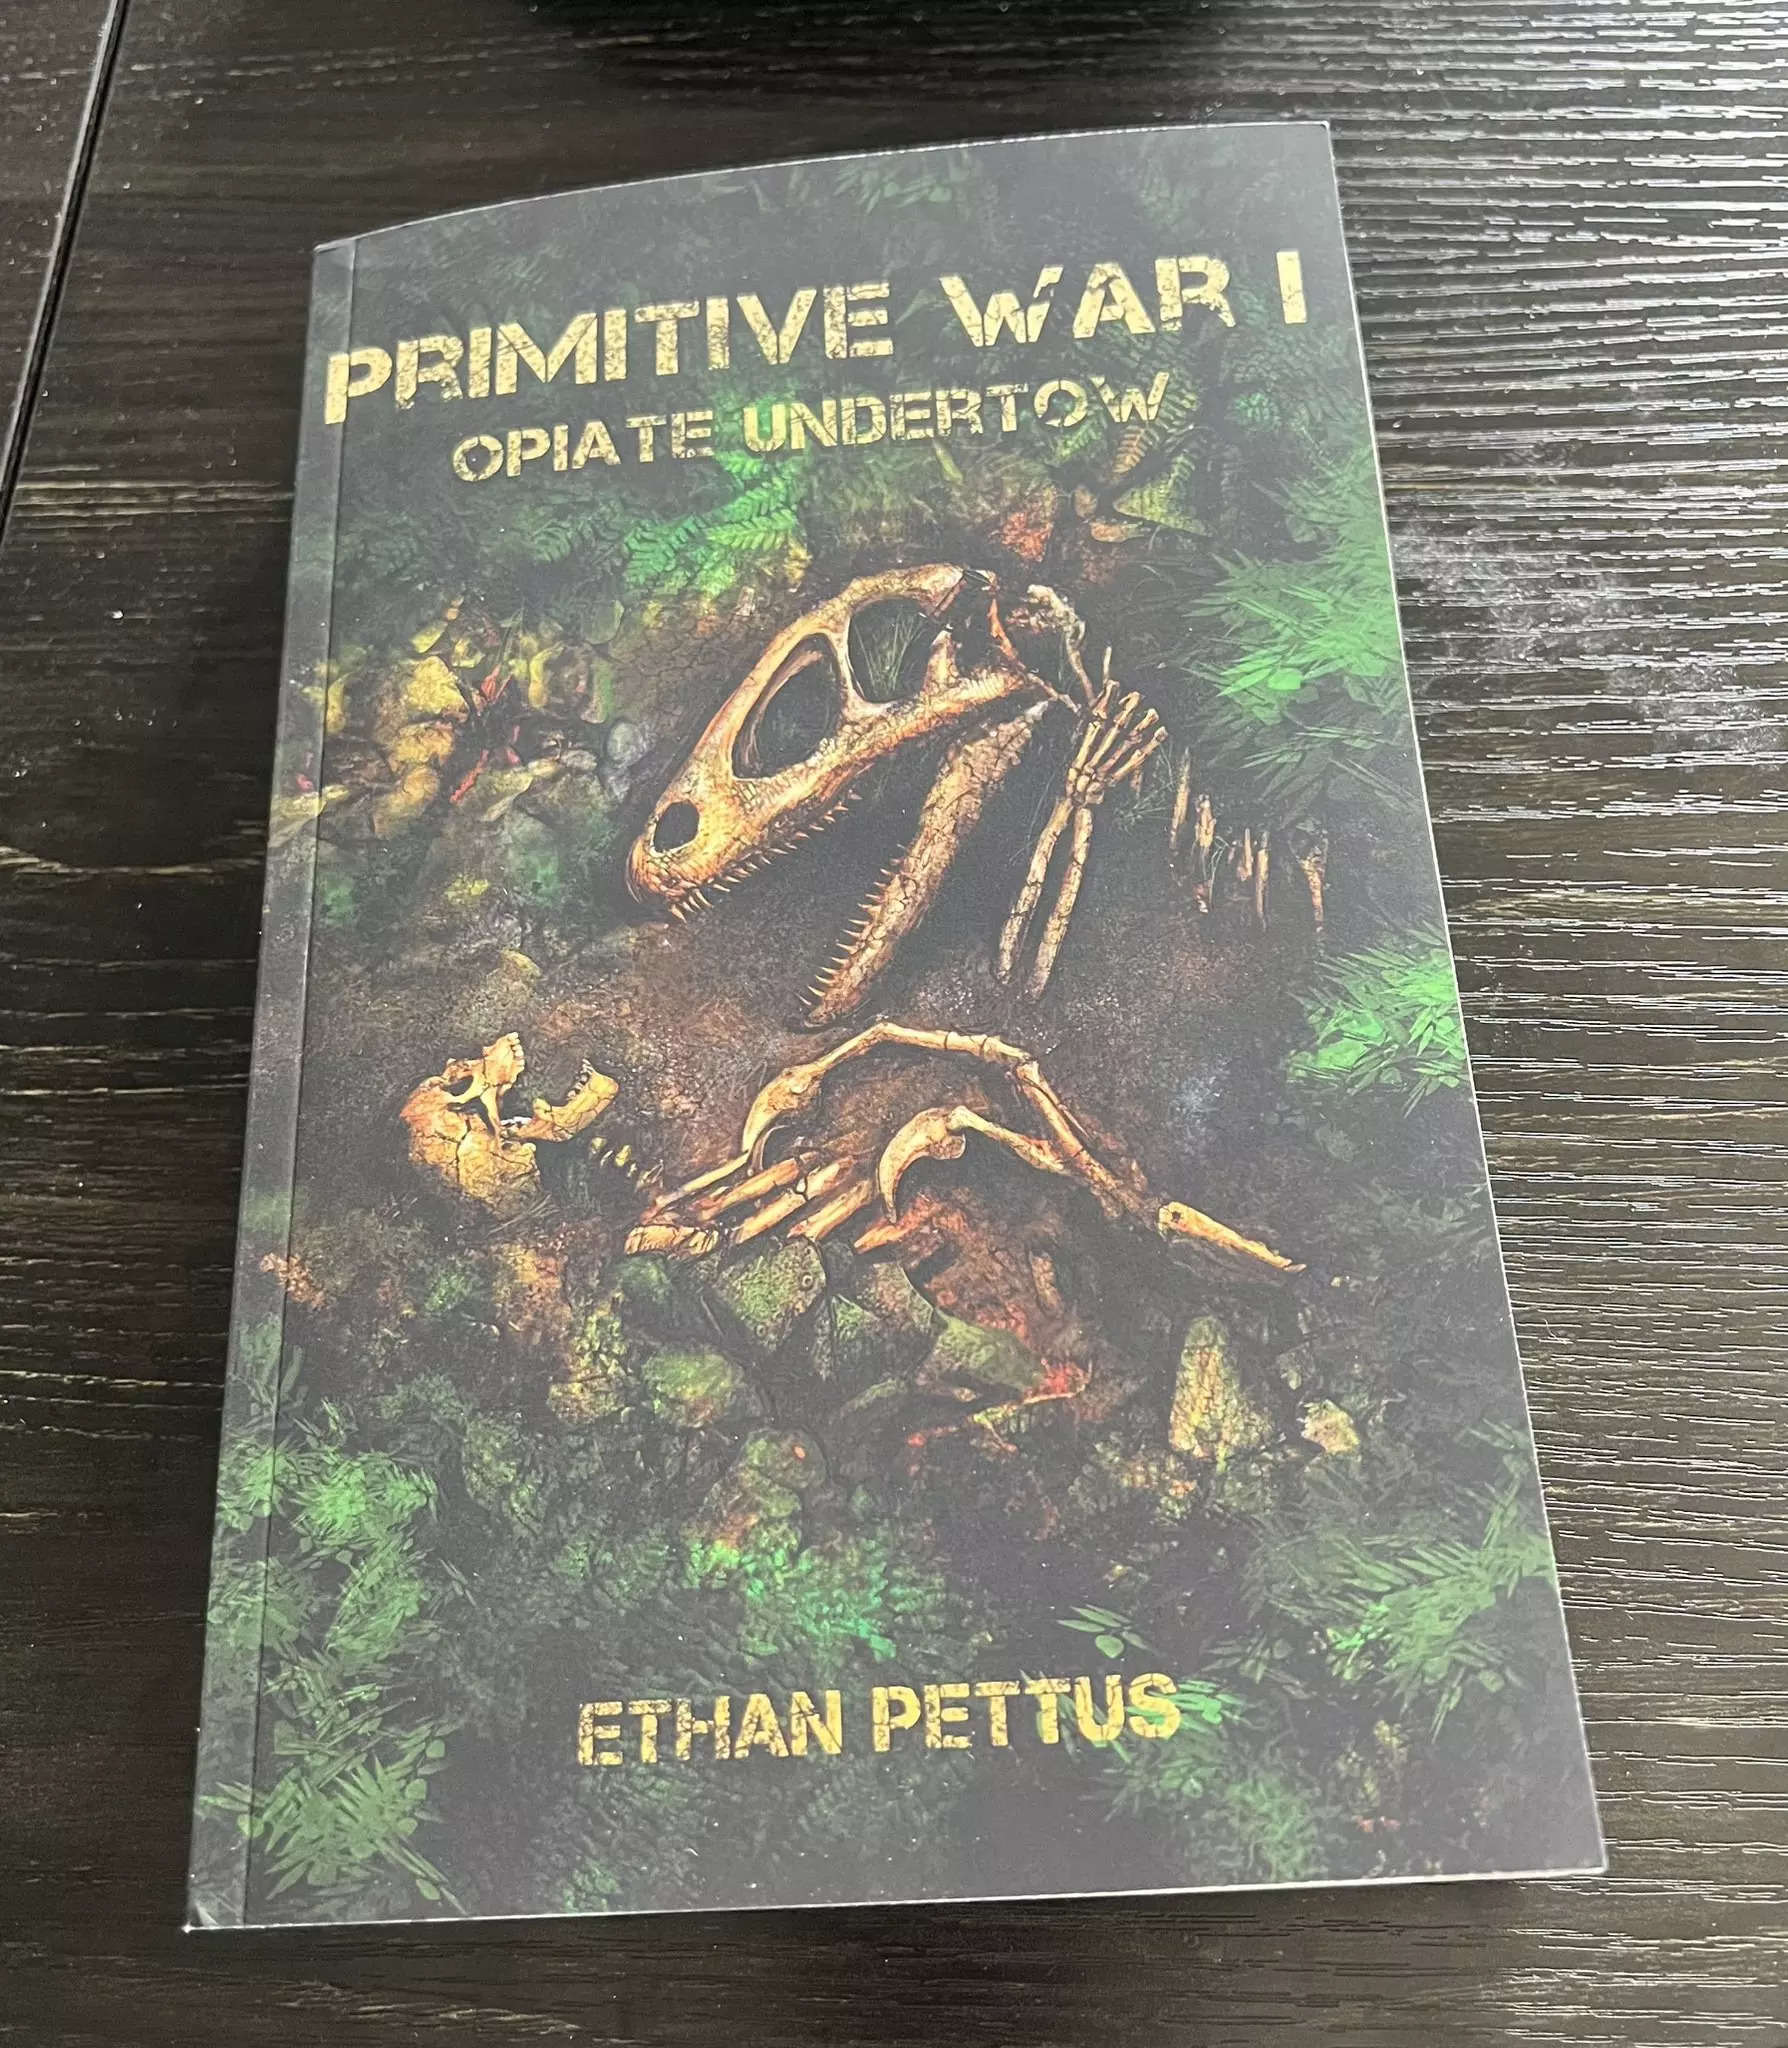 'Primitive War': Here’s what we know about cast, plot and production 